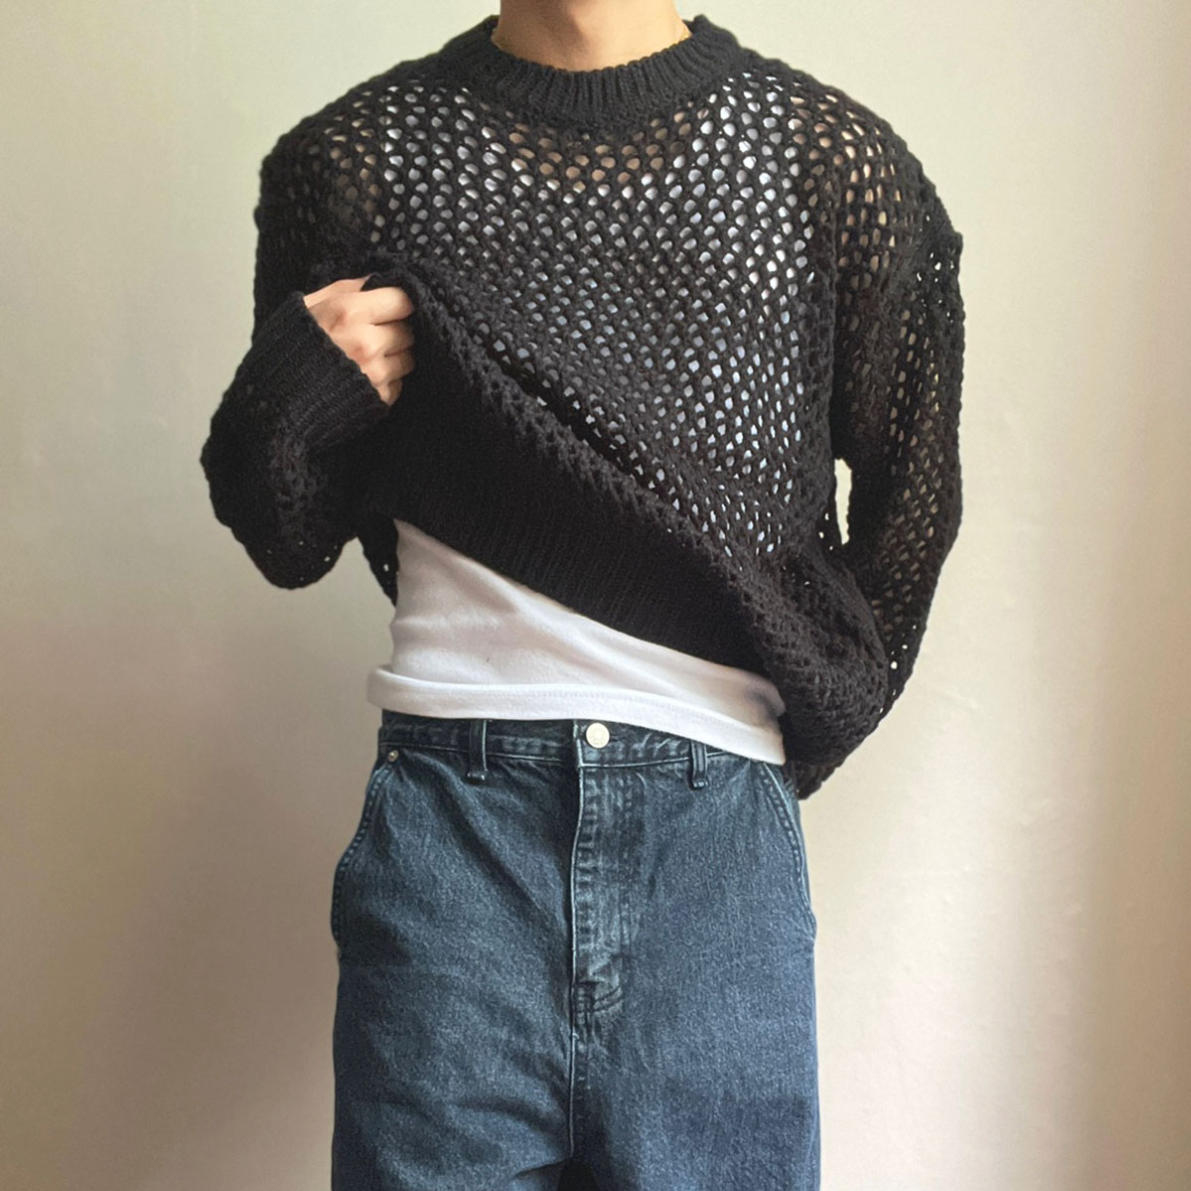 Opening Mesh Oversized Fit See-Through Knitwear